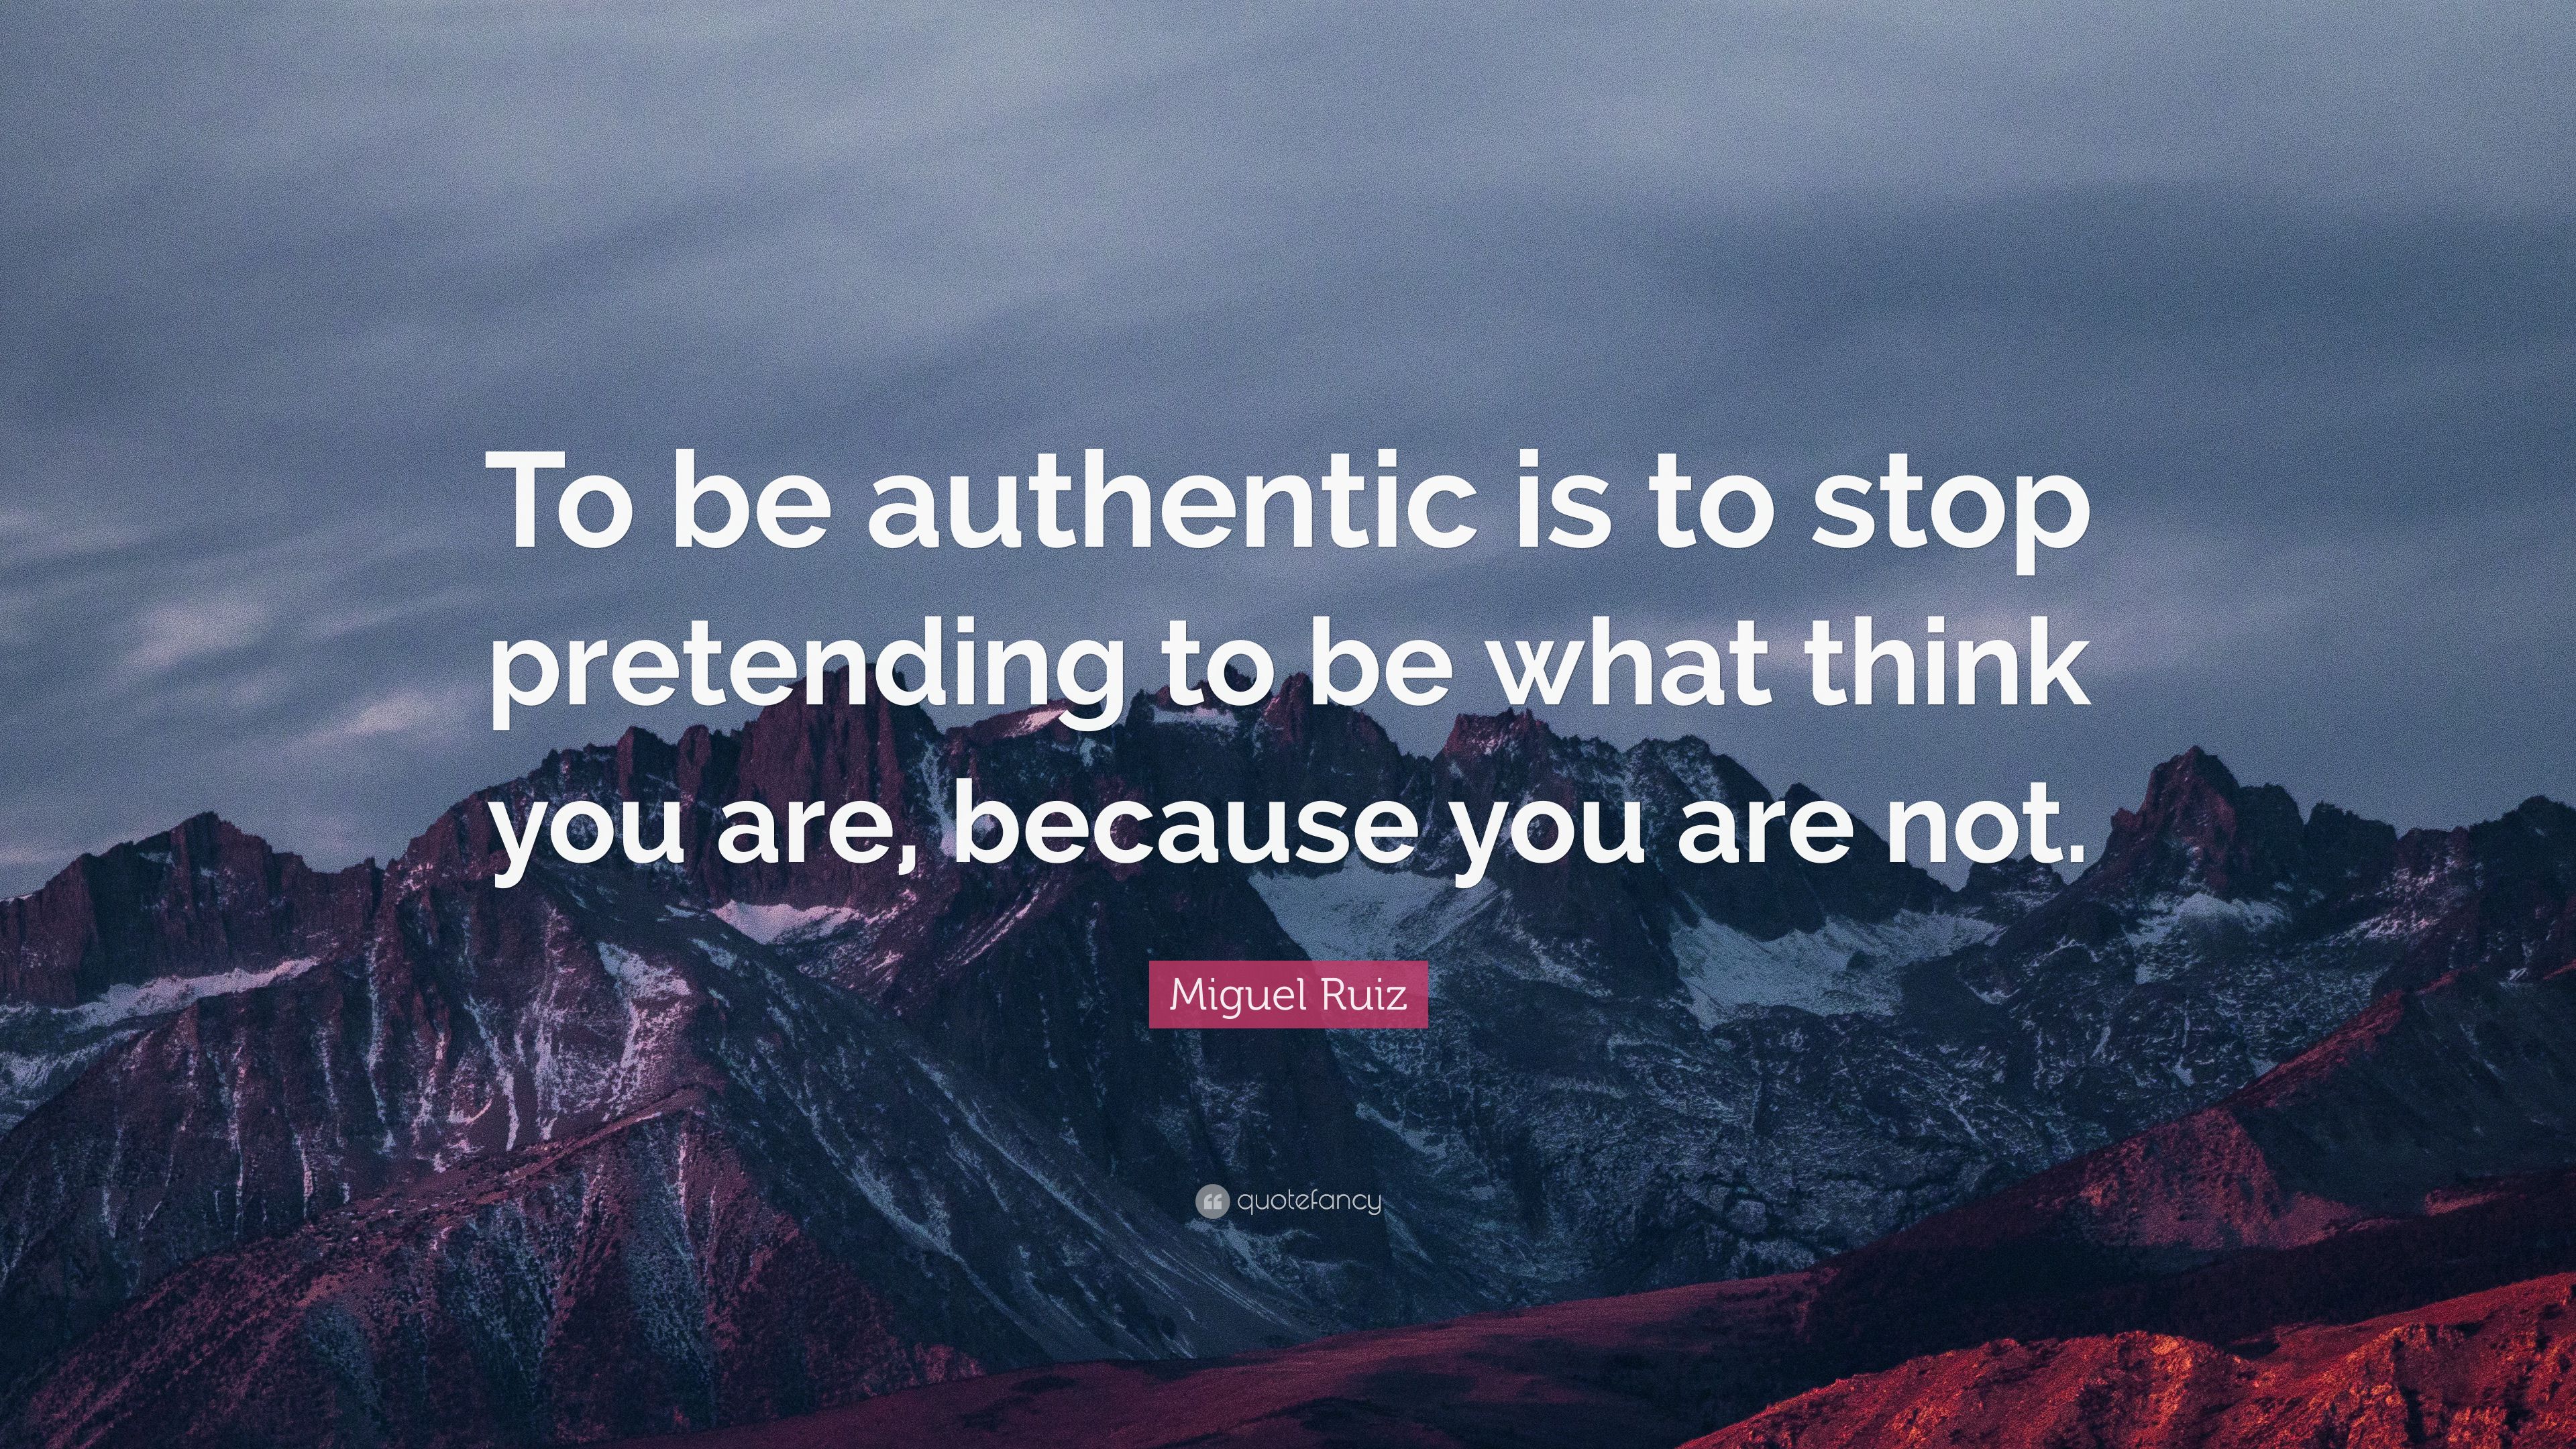 Miguel Ruiz Quote: “To be authentic is to stop pretending to be